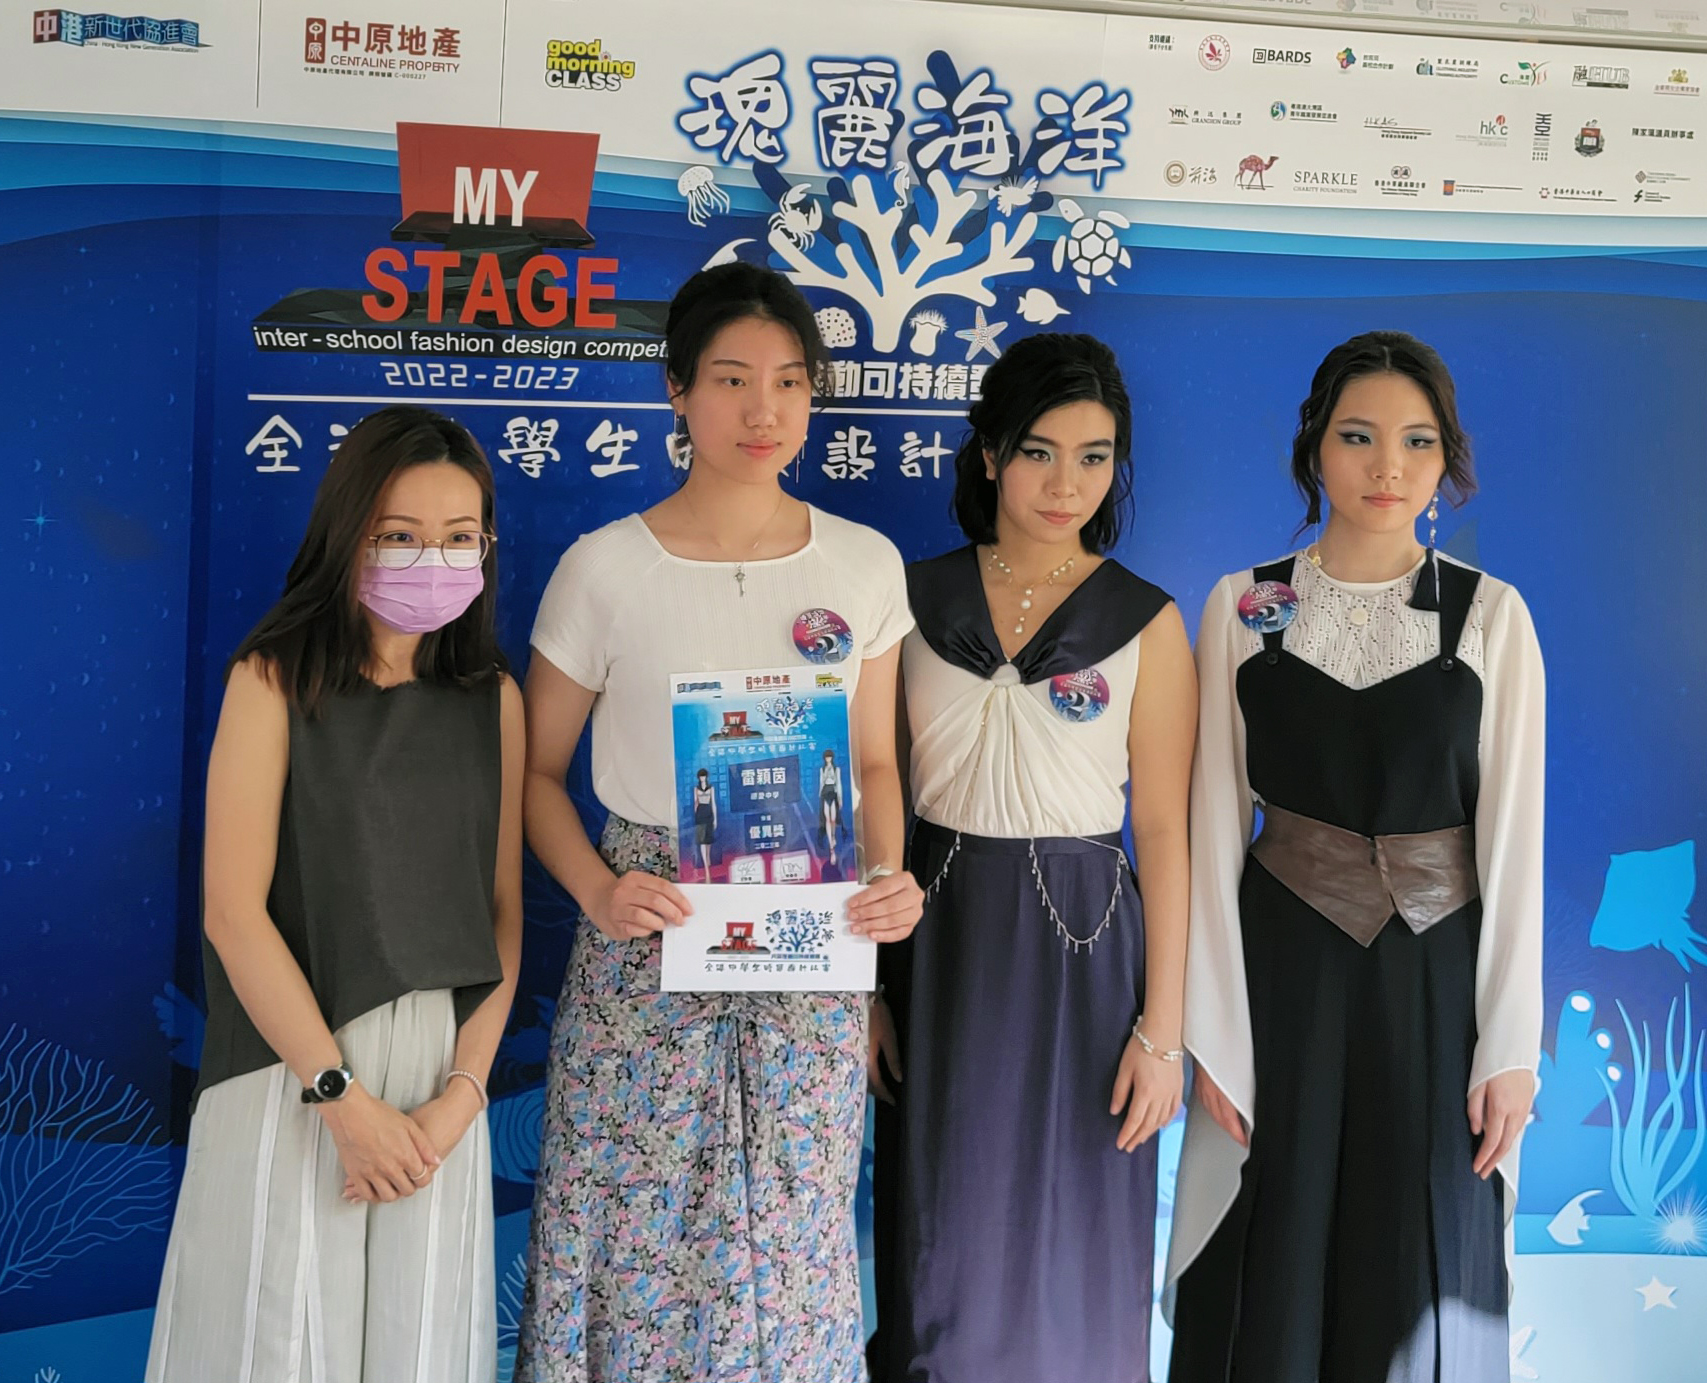 A group of women standing in front of a blue bannerDescription automatically generated